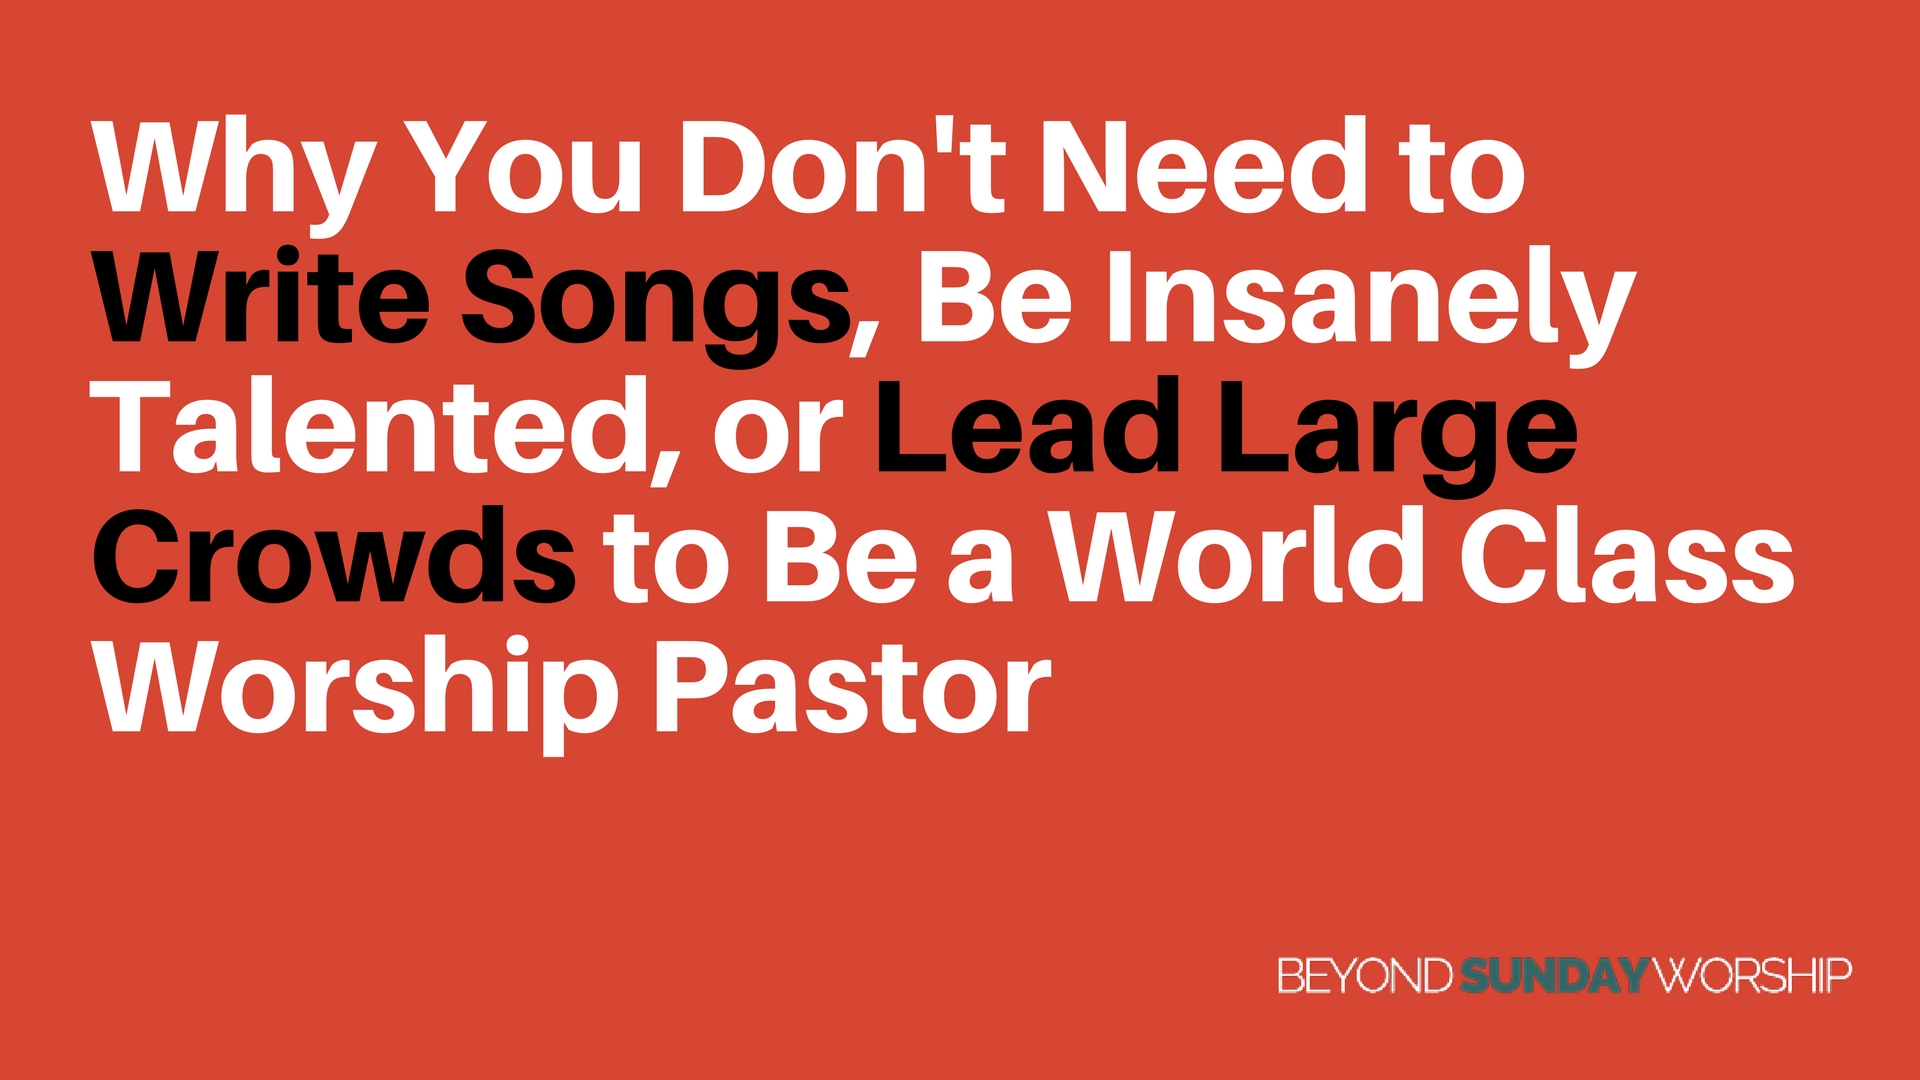 Why You Don't Need to Write Songs, Be Insanely Talented, or Lead Large Crowds to Be a World Class Worship Pastor